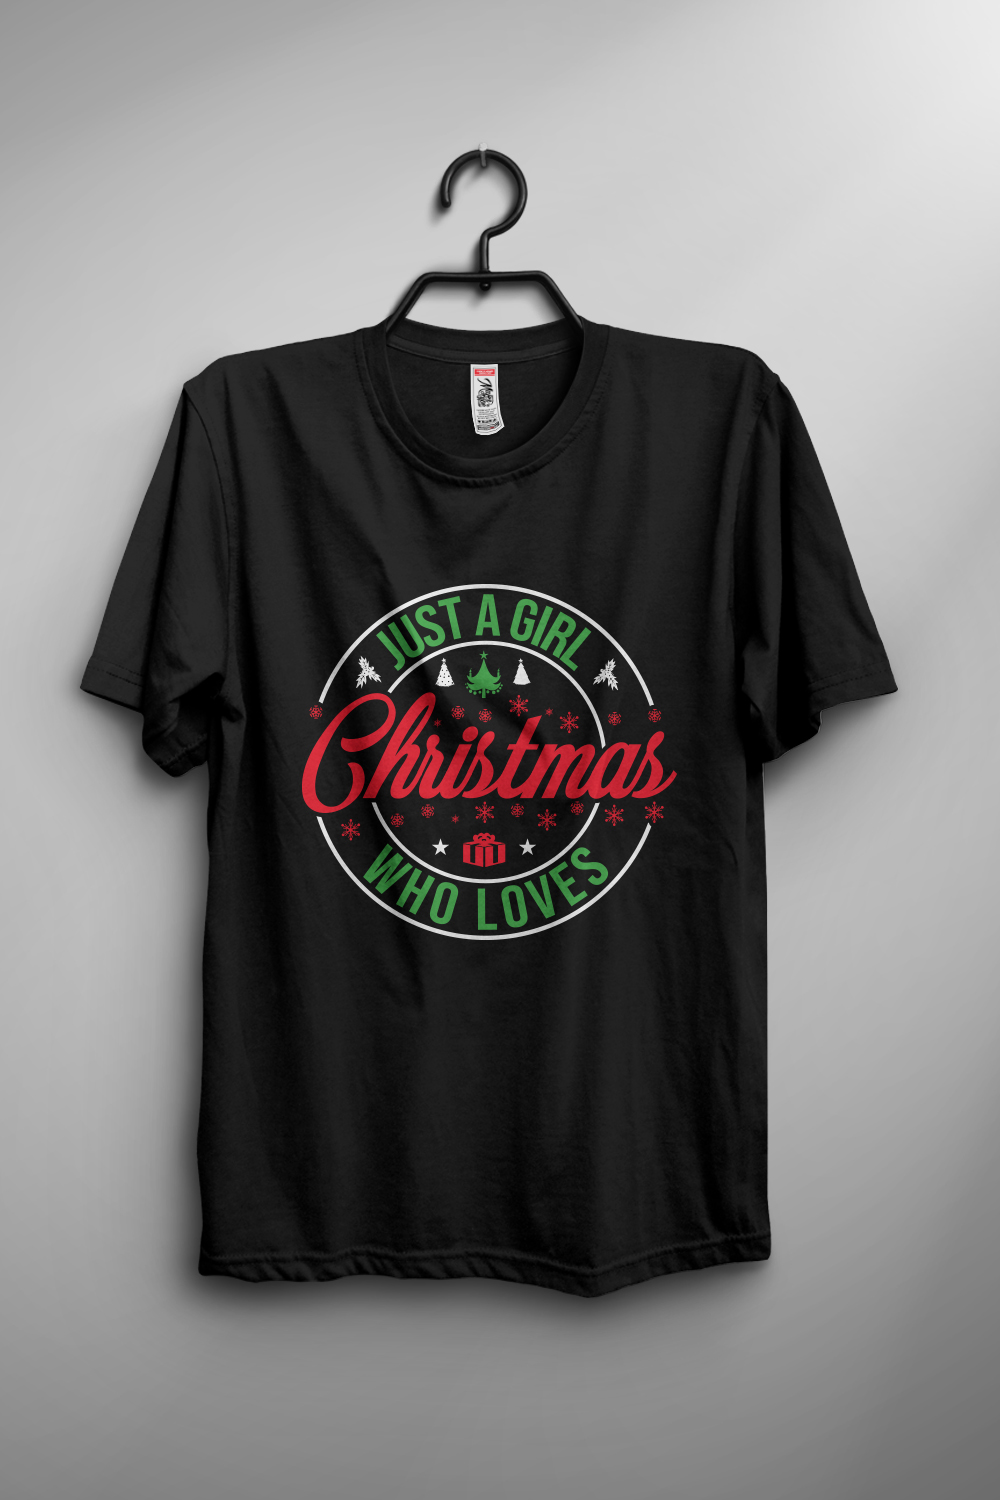 Just A Girl Who Loves Christmas T-shirt design pinterest preview image.